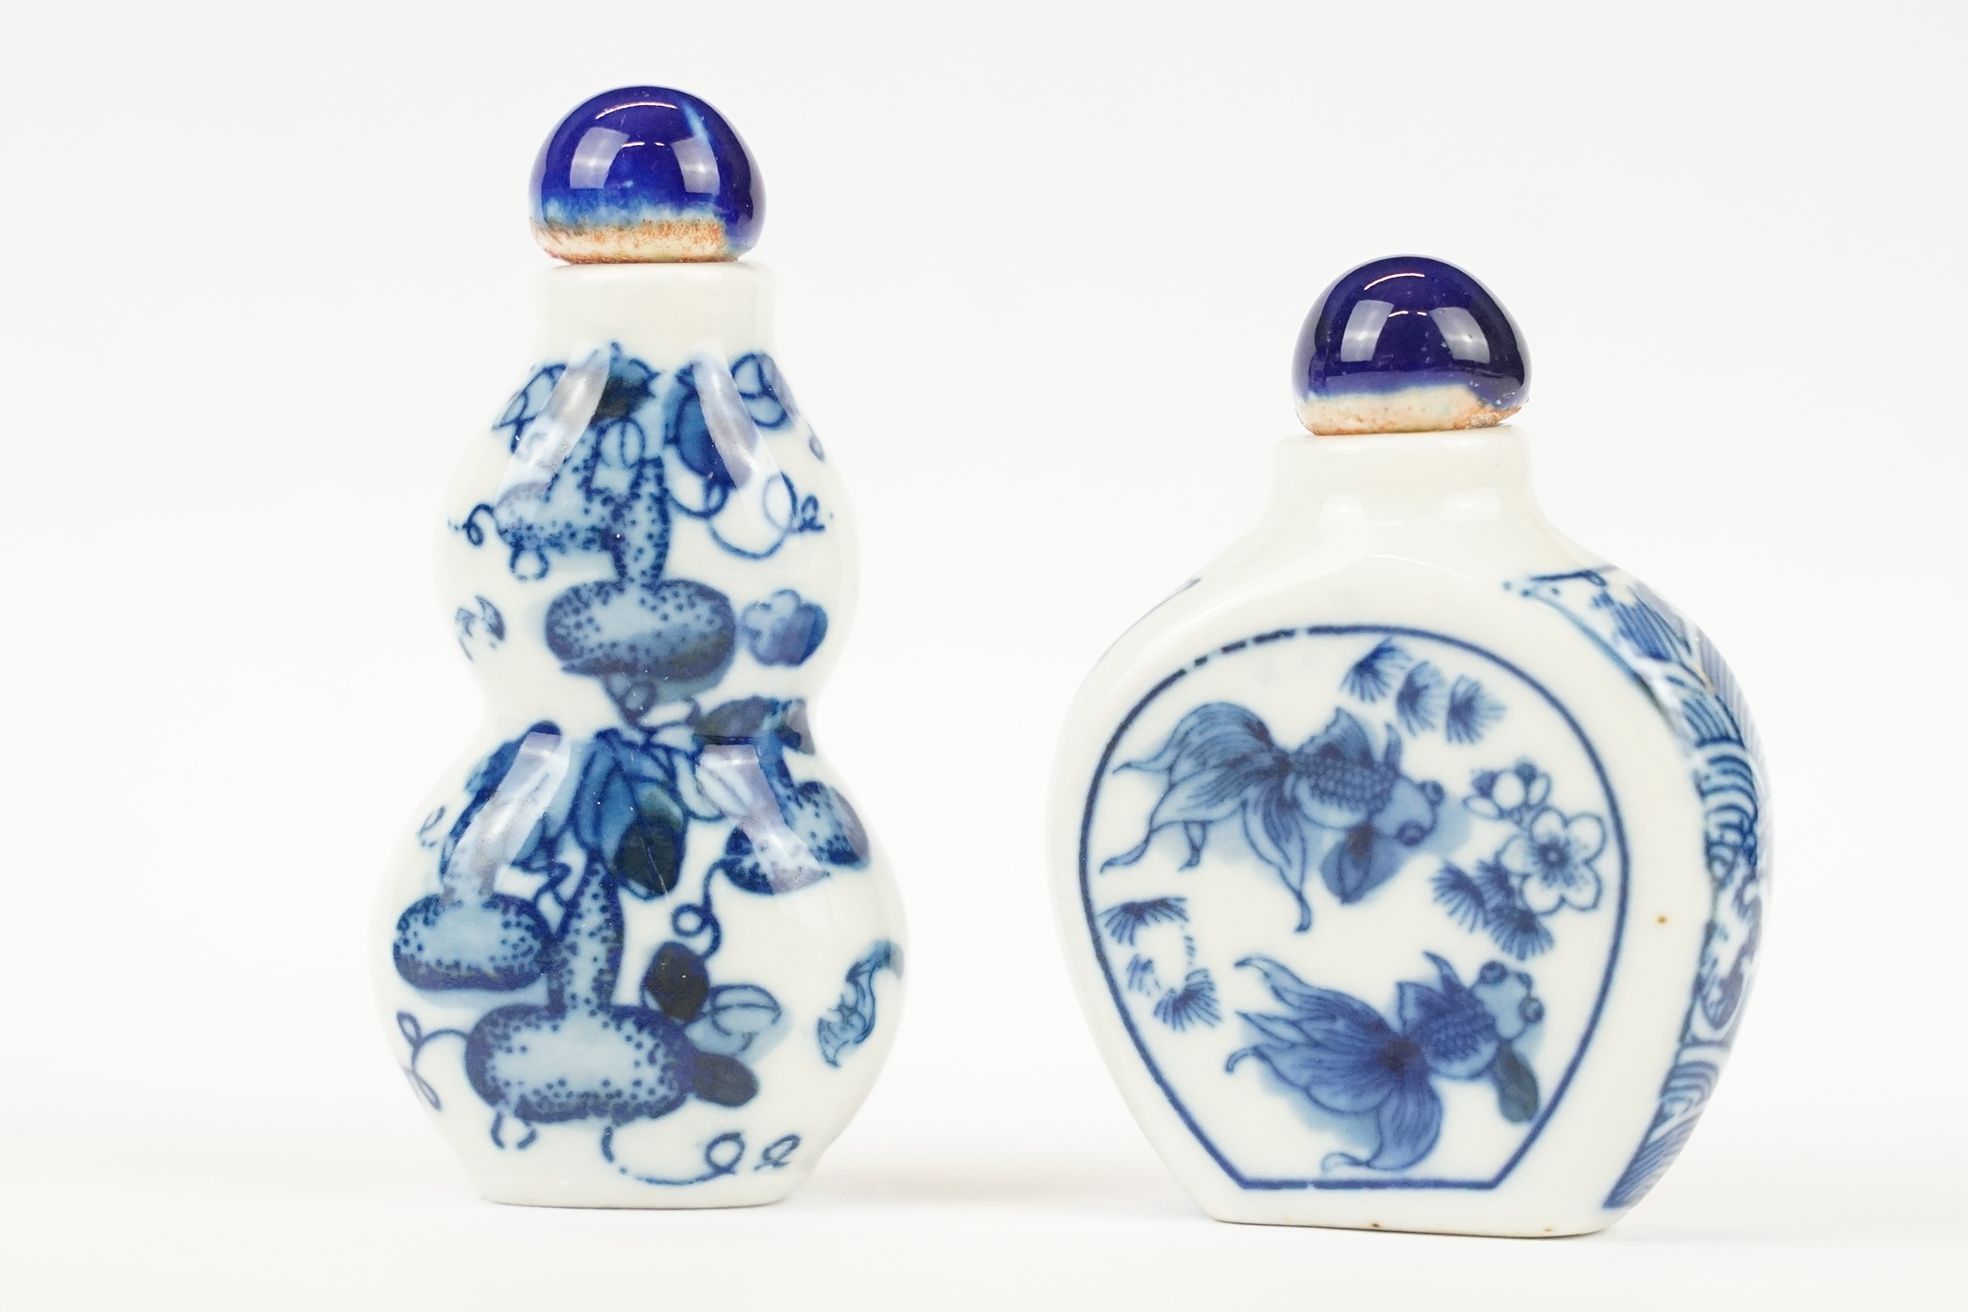 Two Chinese blue and white ceramic snuff bottles with traditional Chinese decoration.